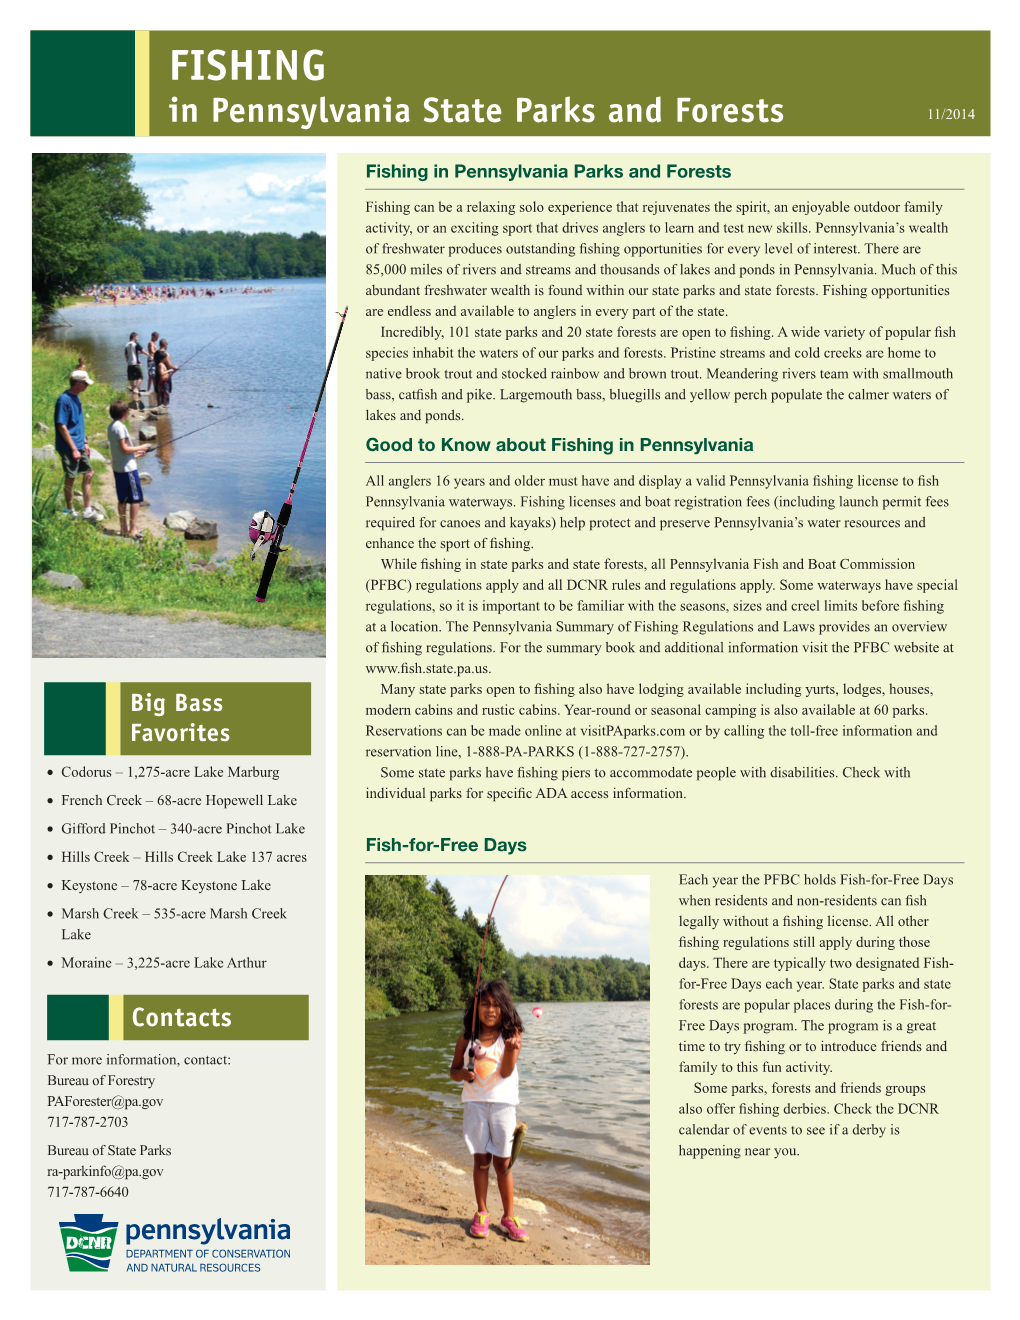 FISHING in Pennsylvania State Parks and Forests 11/2014